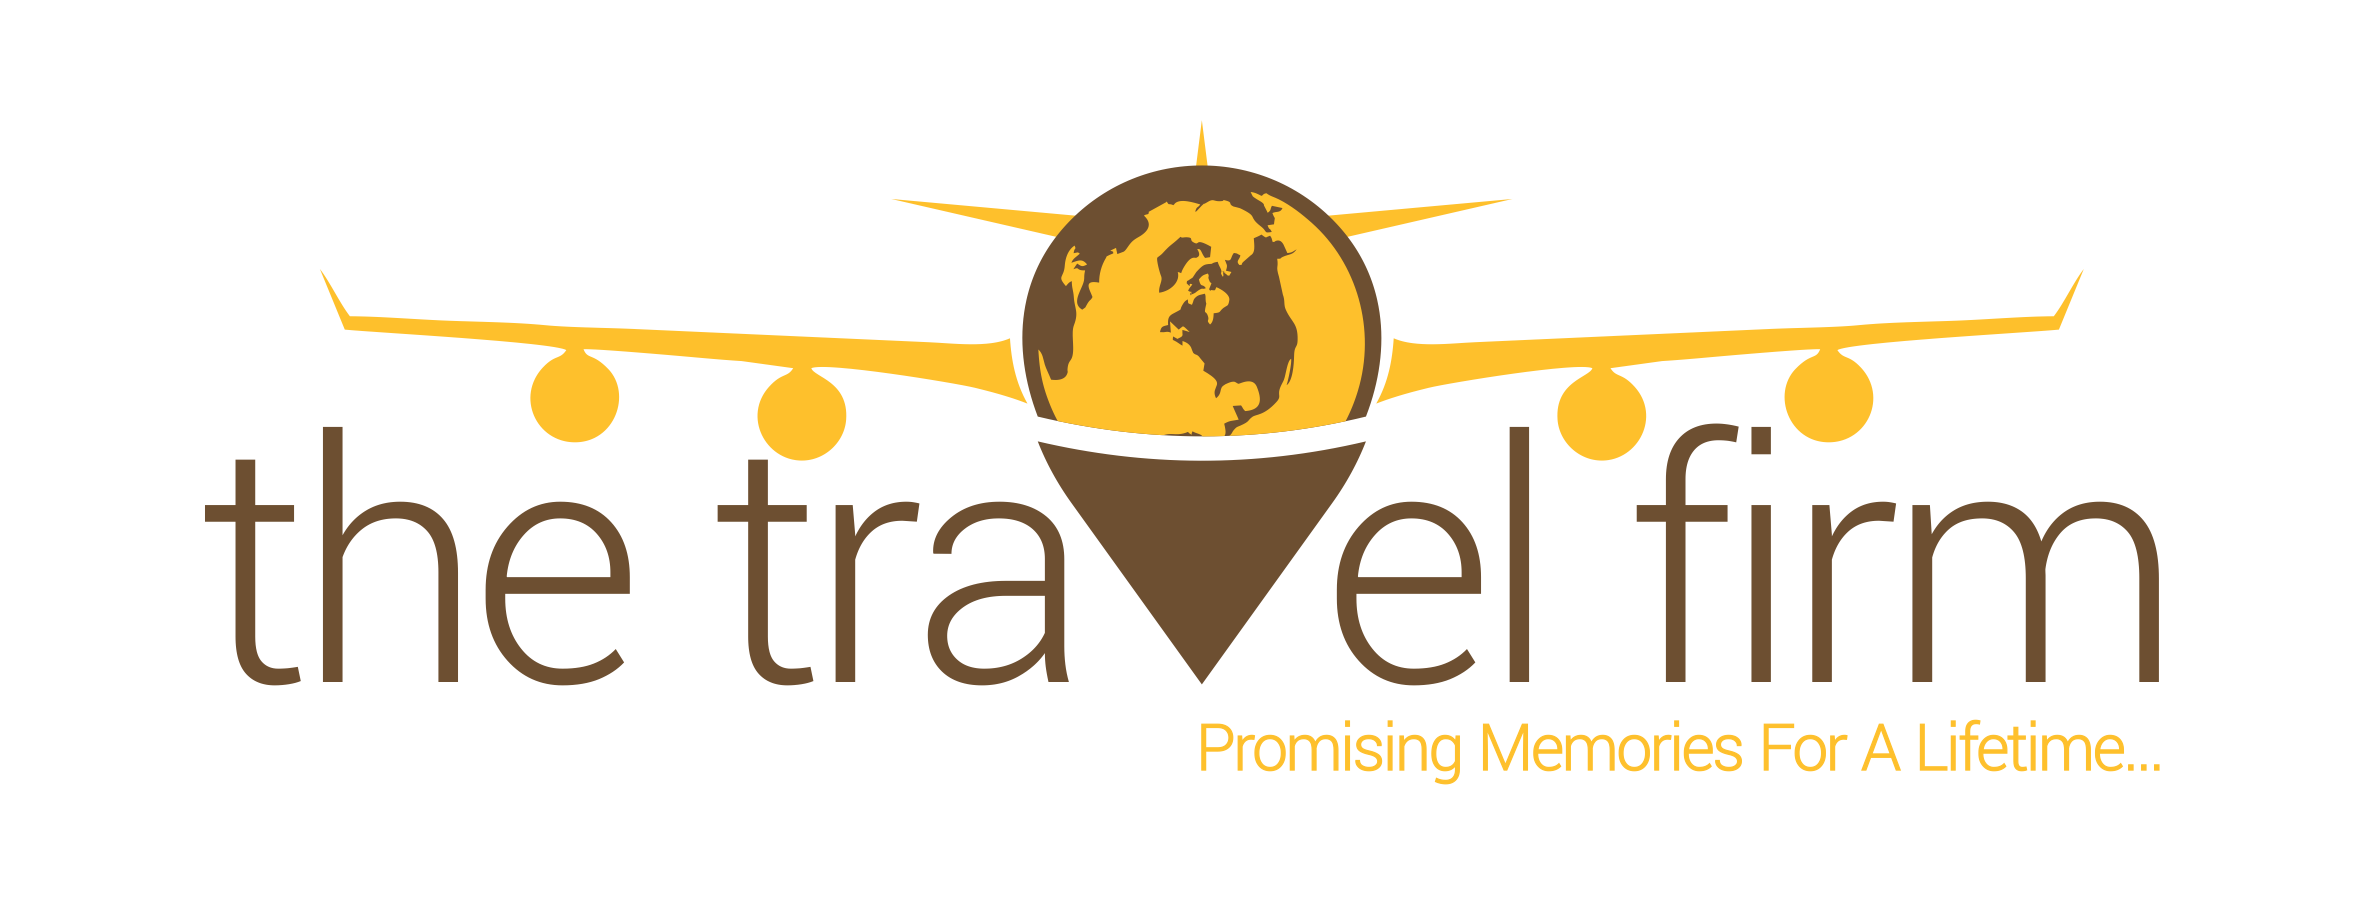 The Travel Firm